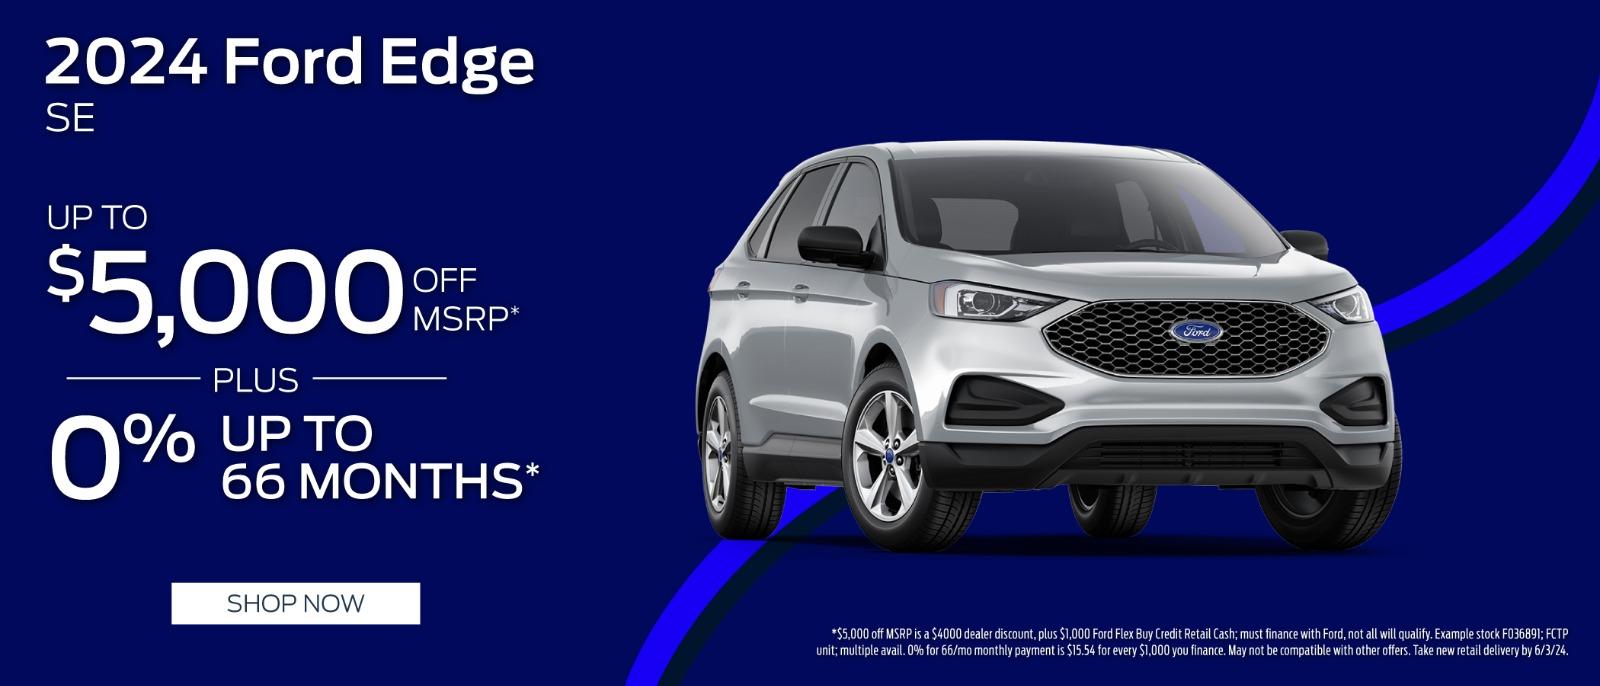 2024 Ford Edge $5,000 off MSRP plus .0% up to 66 months